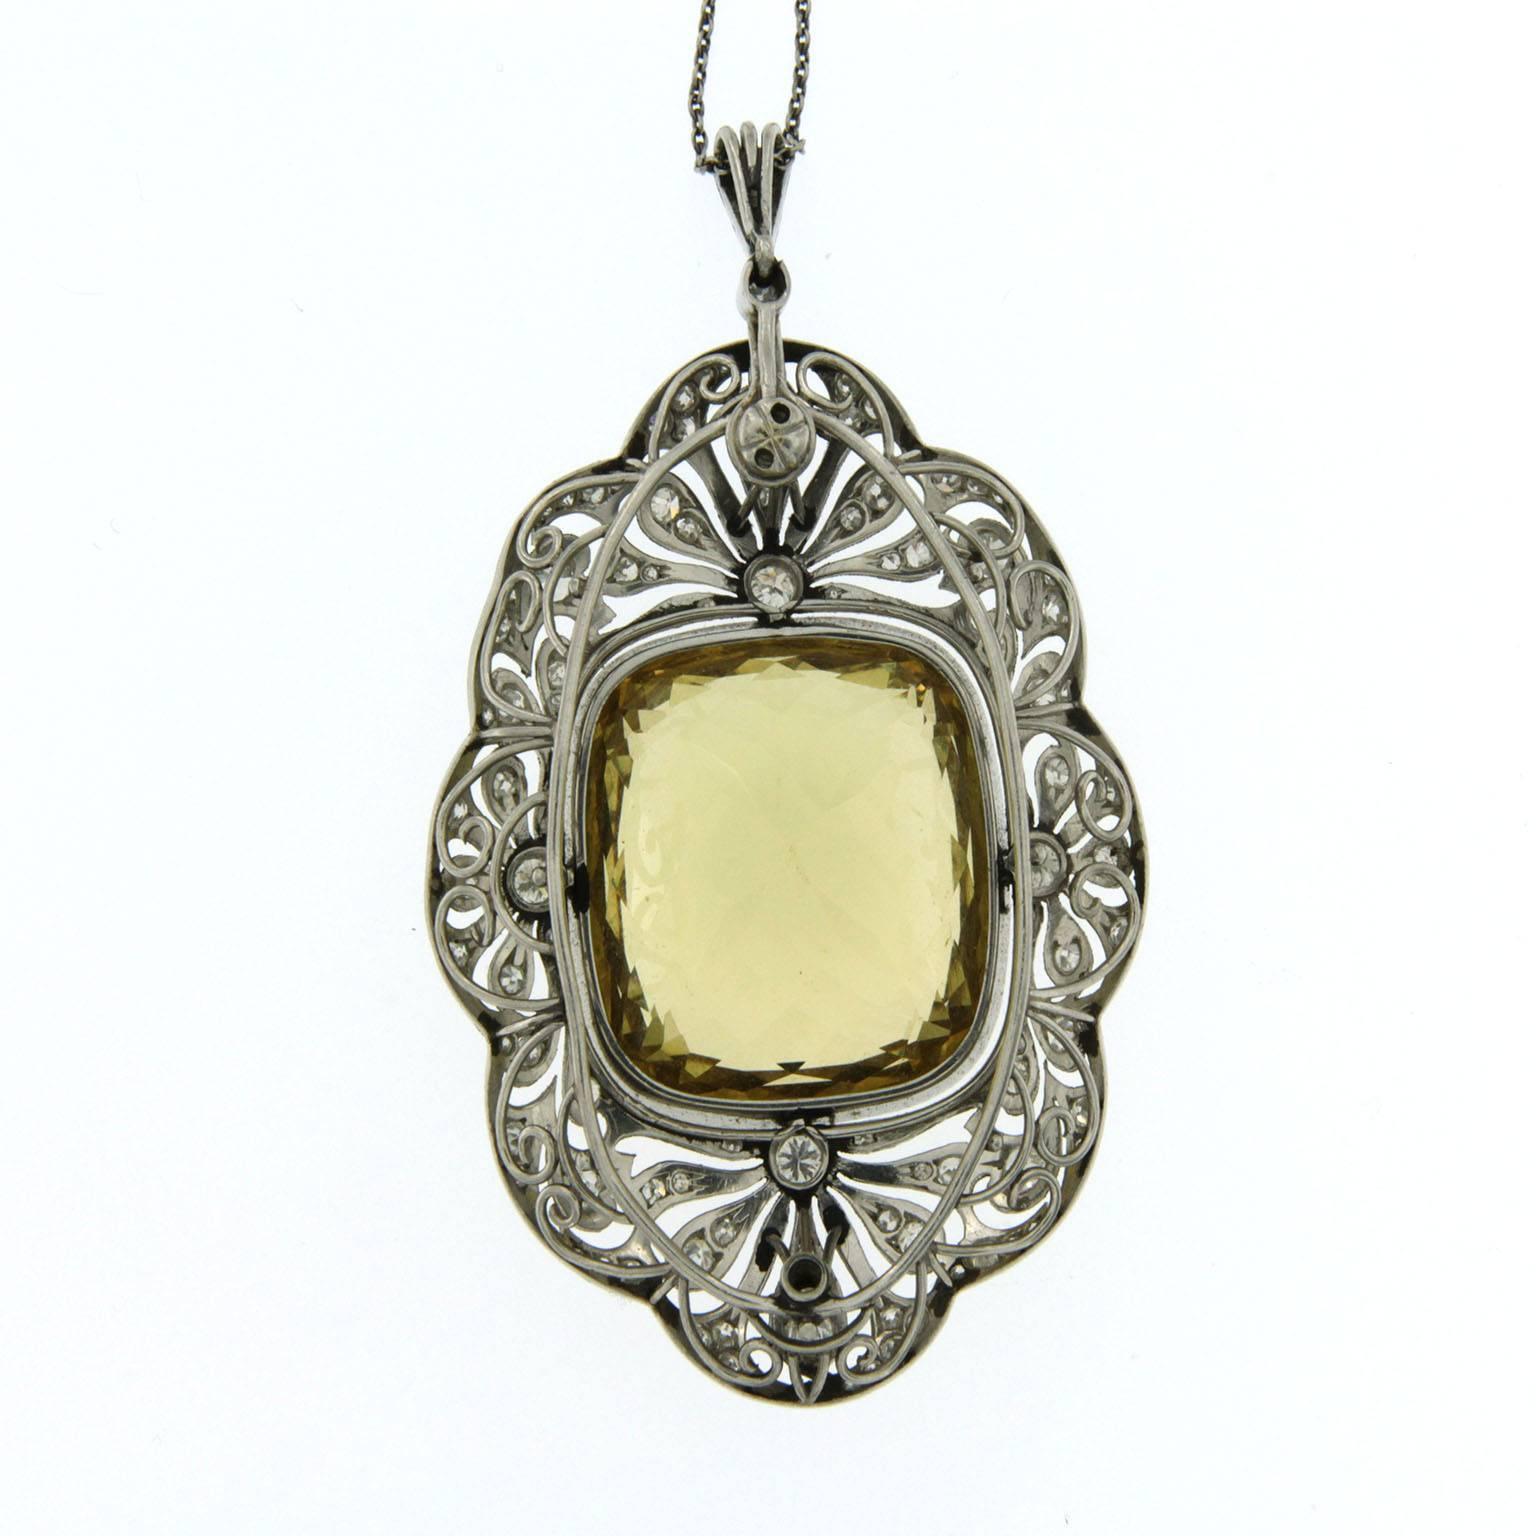 A fine and Rare Victorian pendant/brooch approximately 45 carats Heliodor set in 18k white gold,  framed by approximately 3 ct diamonds. The pendant can also be converted in to a brooch.
Heliodor measurements: 23 mm by 22 mm, dept 14.06 mm.
Gold